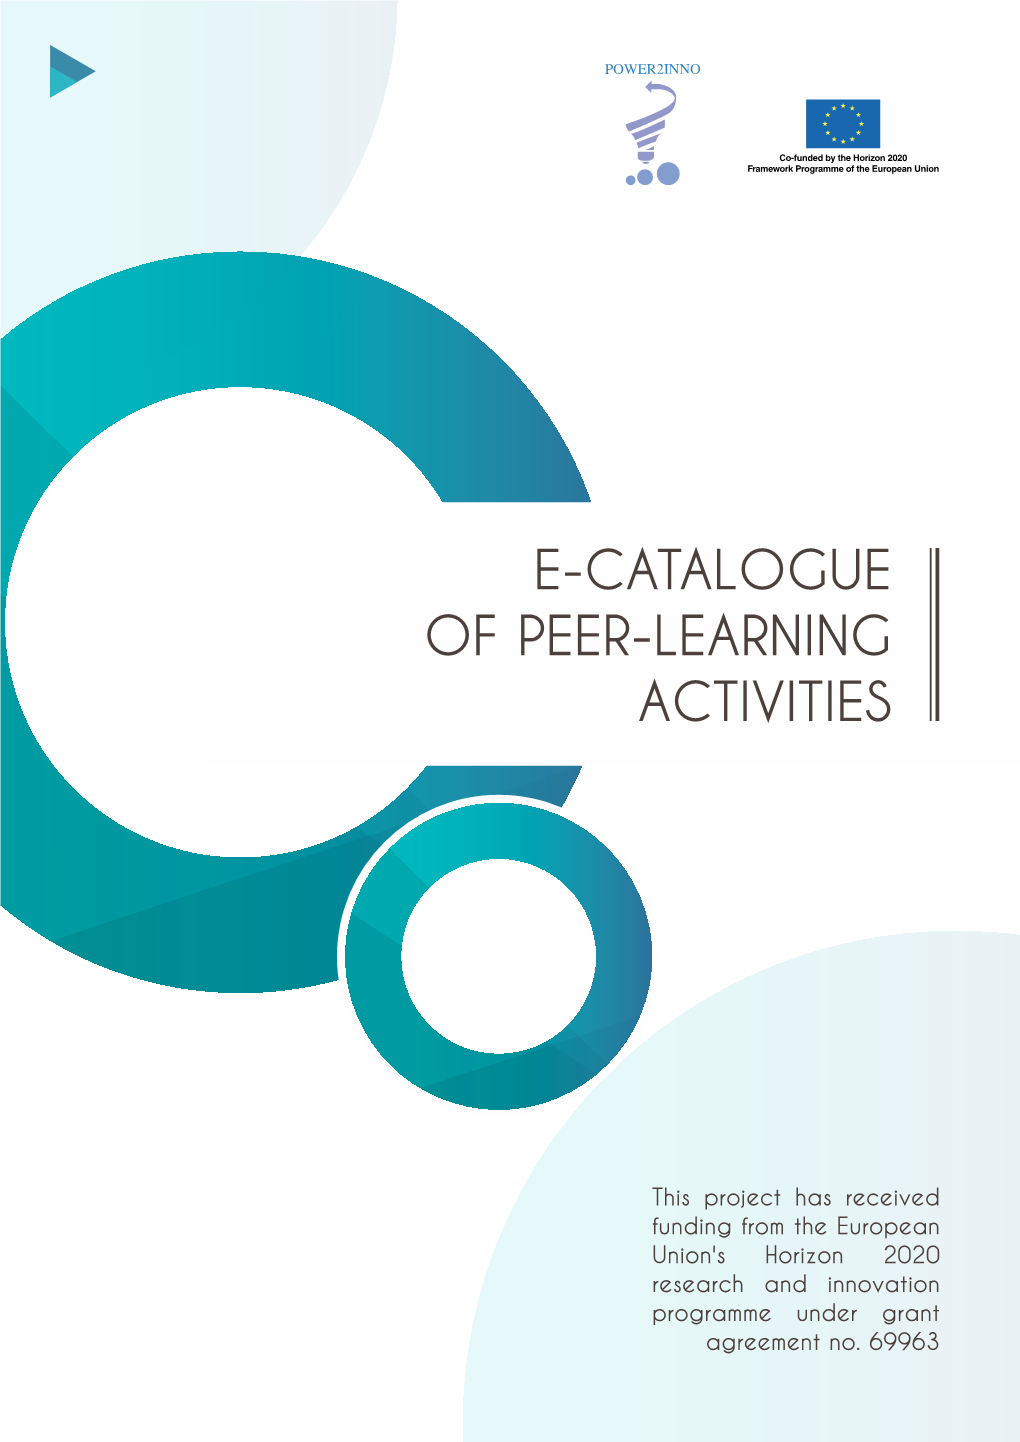 E-CATALOGUE of PEER-LEARNING ACTIVITIES Partners